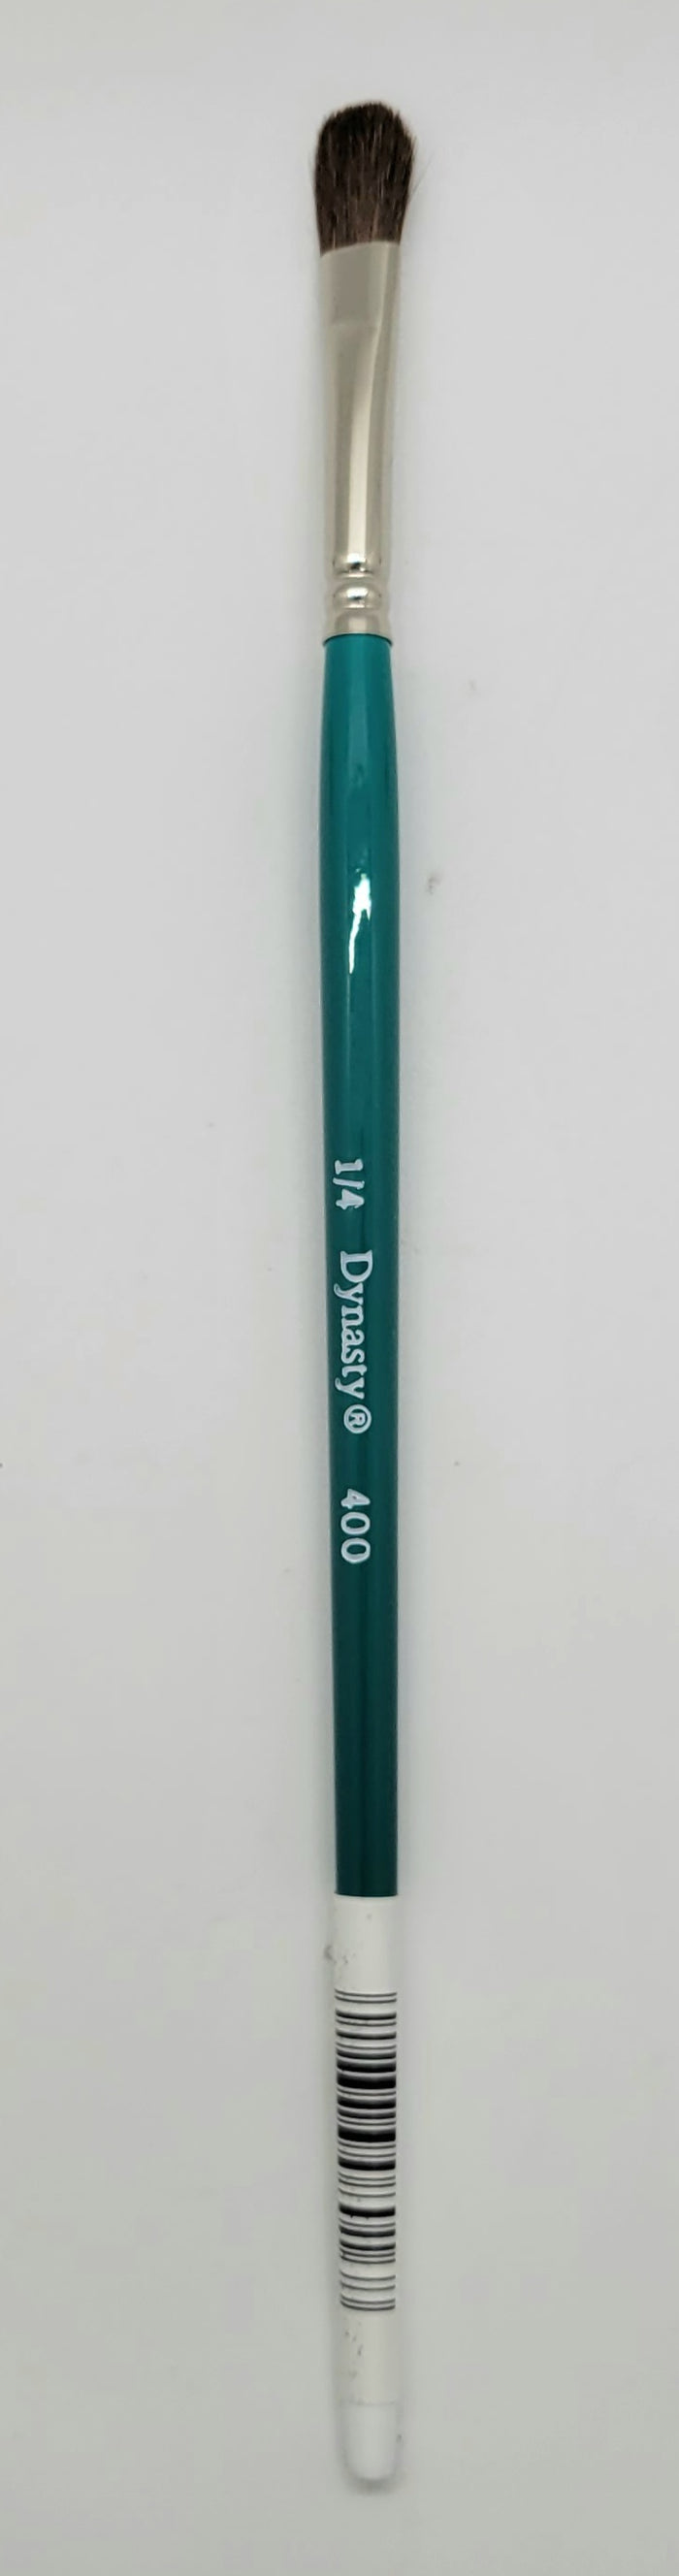 Dynasty Brushes, Series 400 Mini Mop